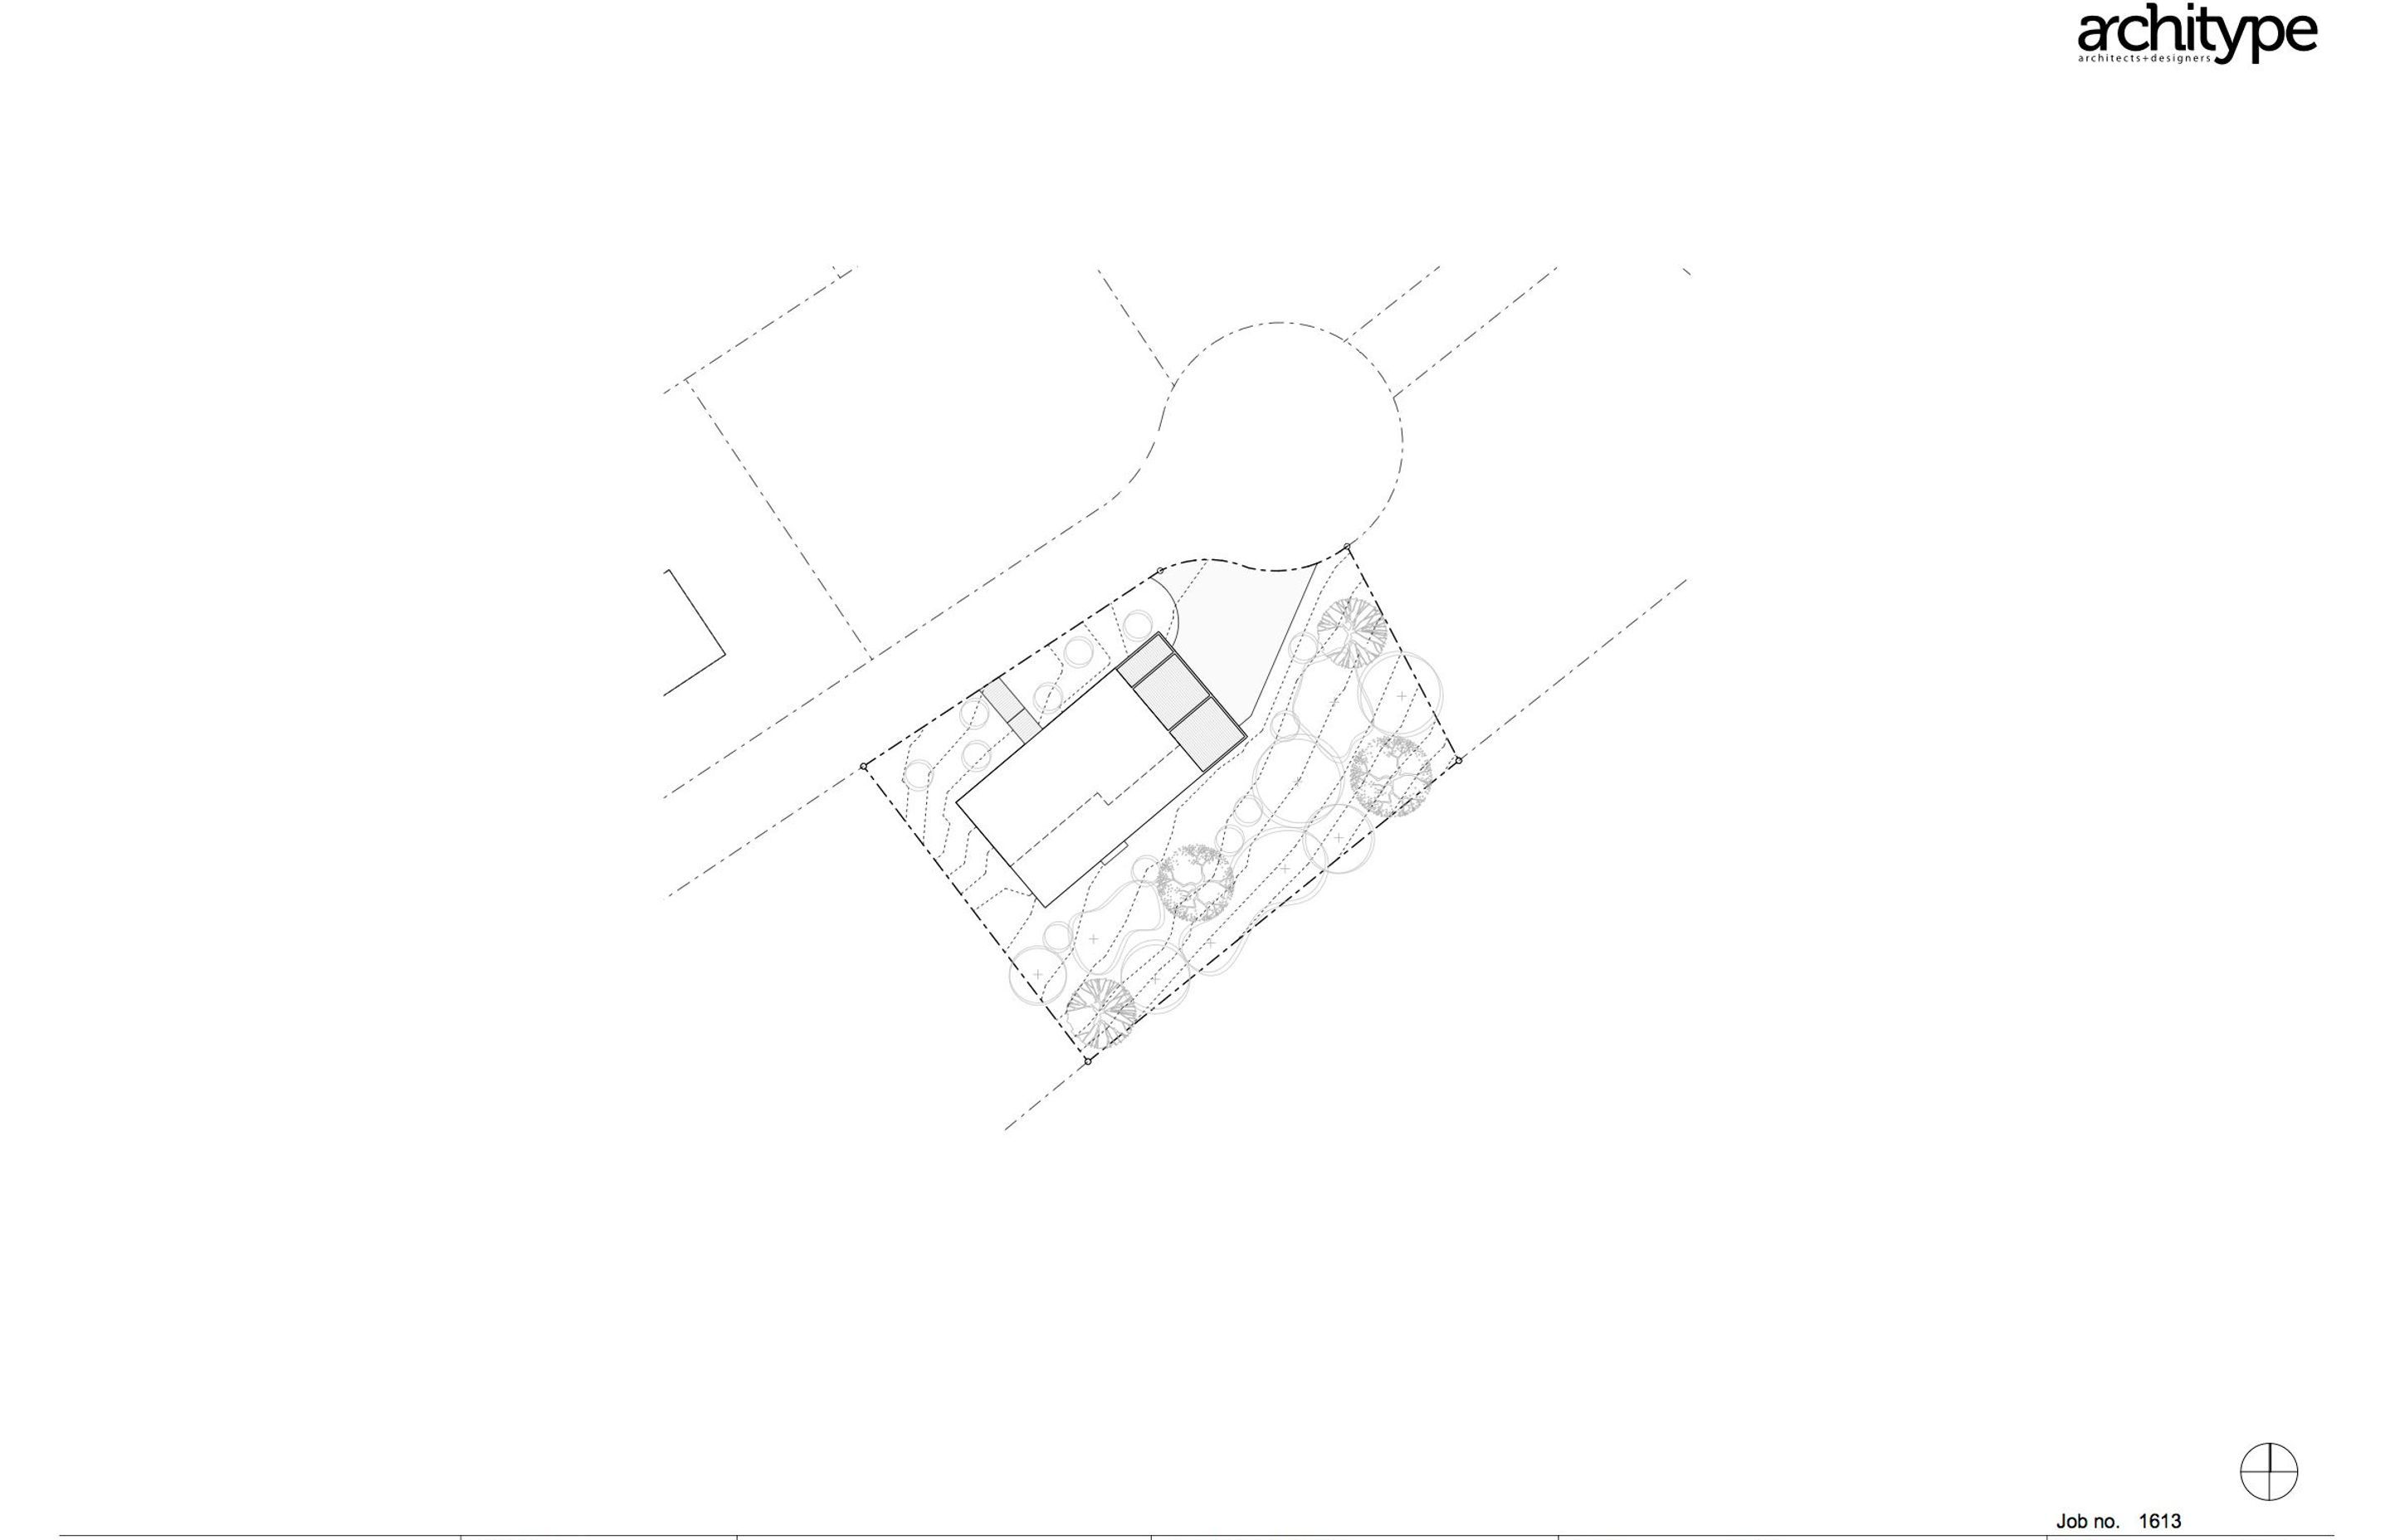 Site plan by Architype.